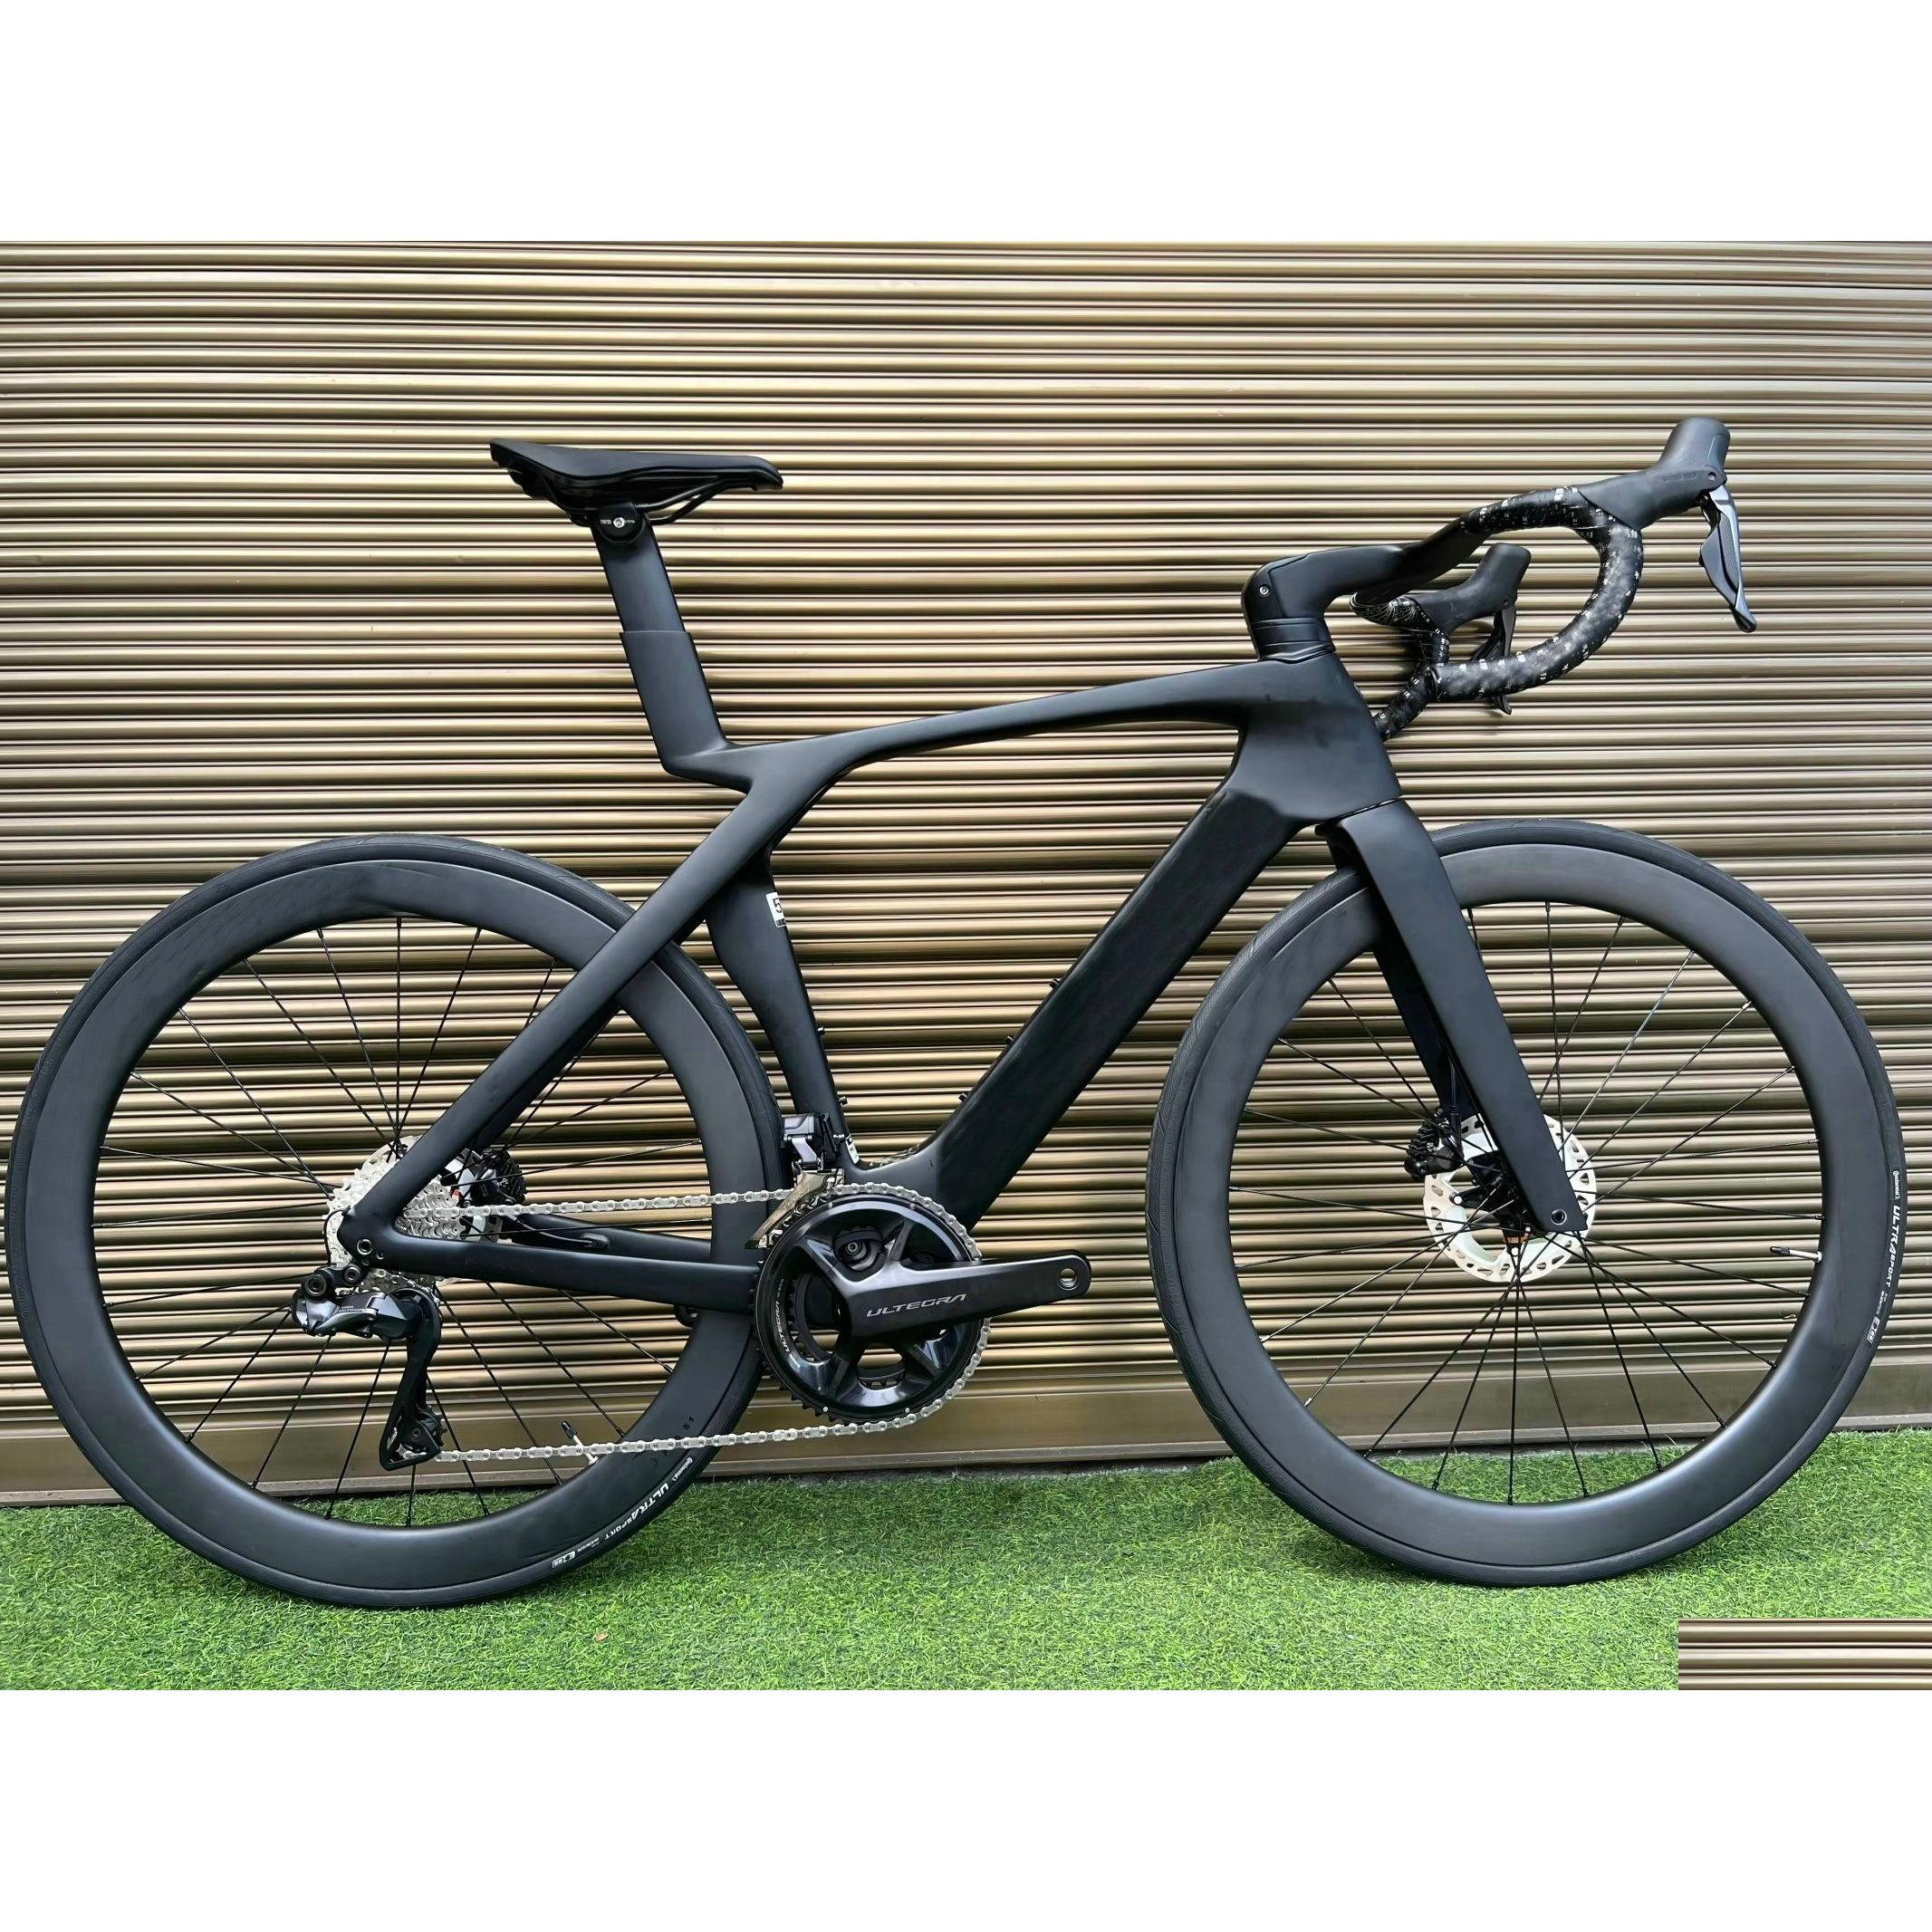 Bikes Diy Slr 9 Carbon Road Fl Bike Glossy With R7170 Di2 Groupset 50Mm Wheelset Drop Delivery Sports Outdoors Cycling Dhsgi